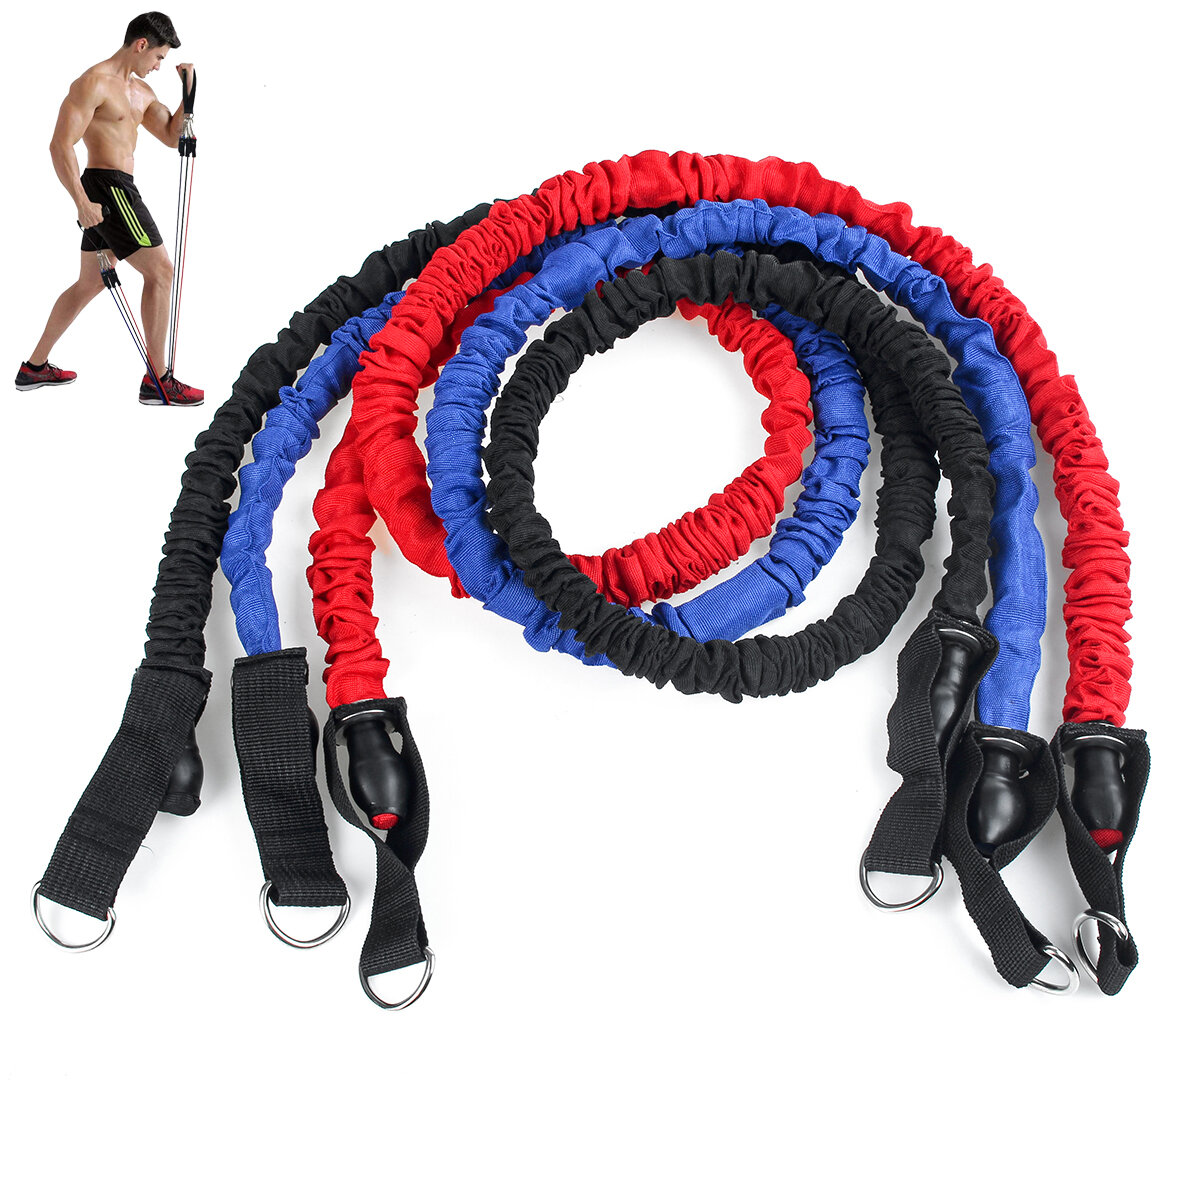 7/9/12/16/20 Pcs Fitness Resistance Bands Set Home Stretch Strength Training Yoga Pilates Exercise T